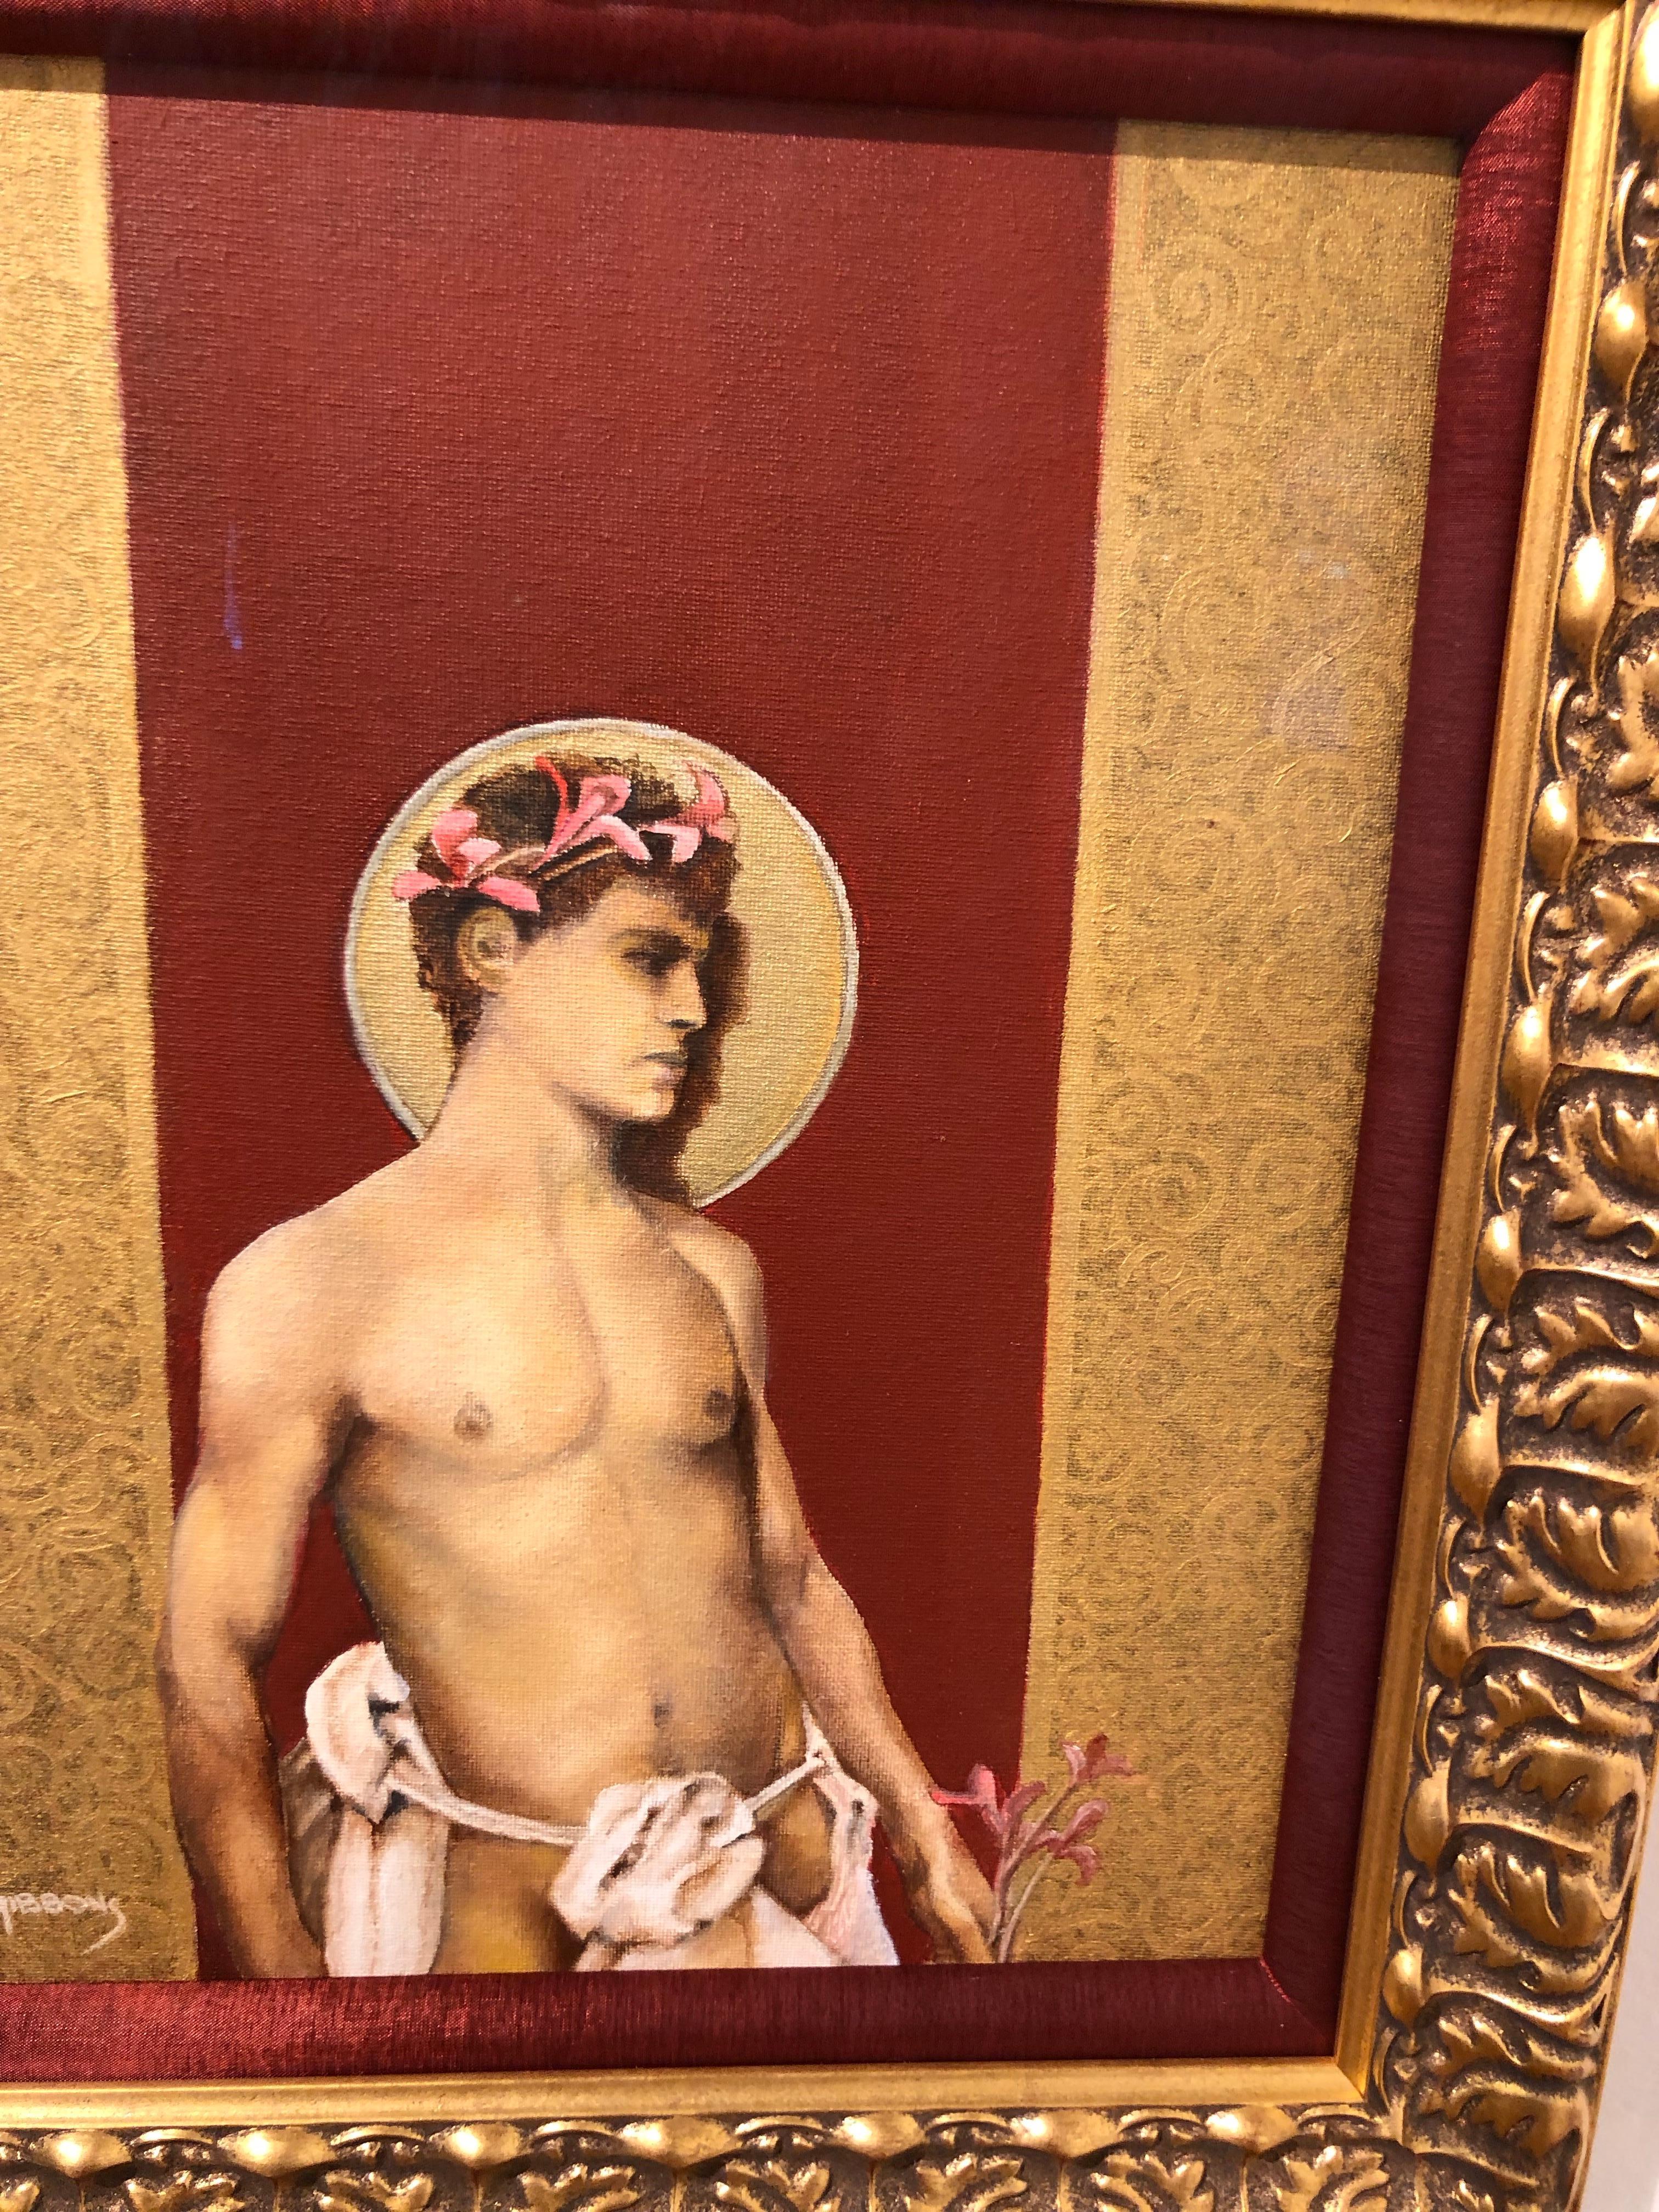 Saint II - Nude Male Torso Painting on Red and Gold by Richard Gibbons 4